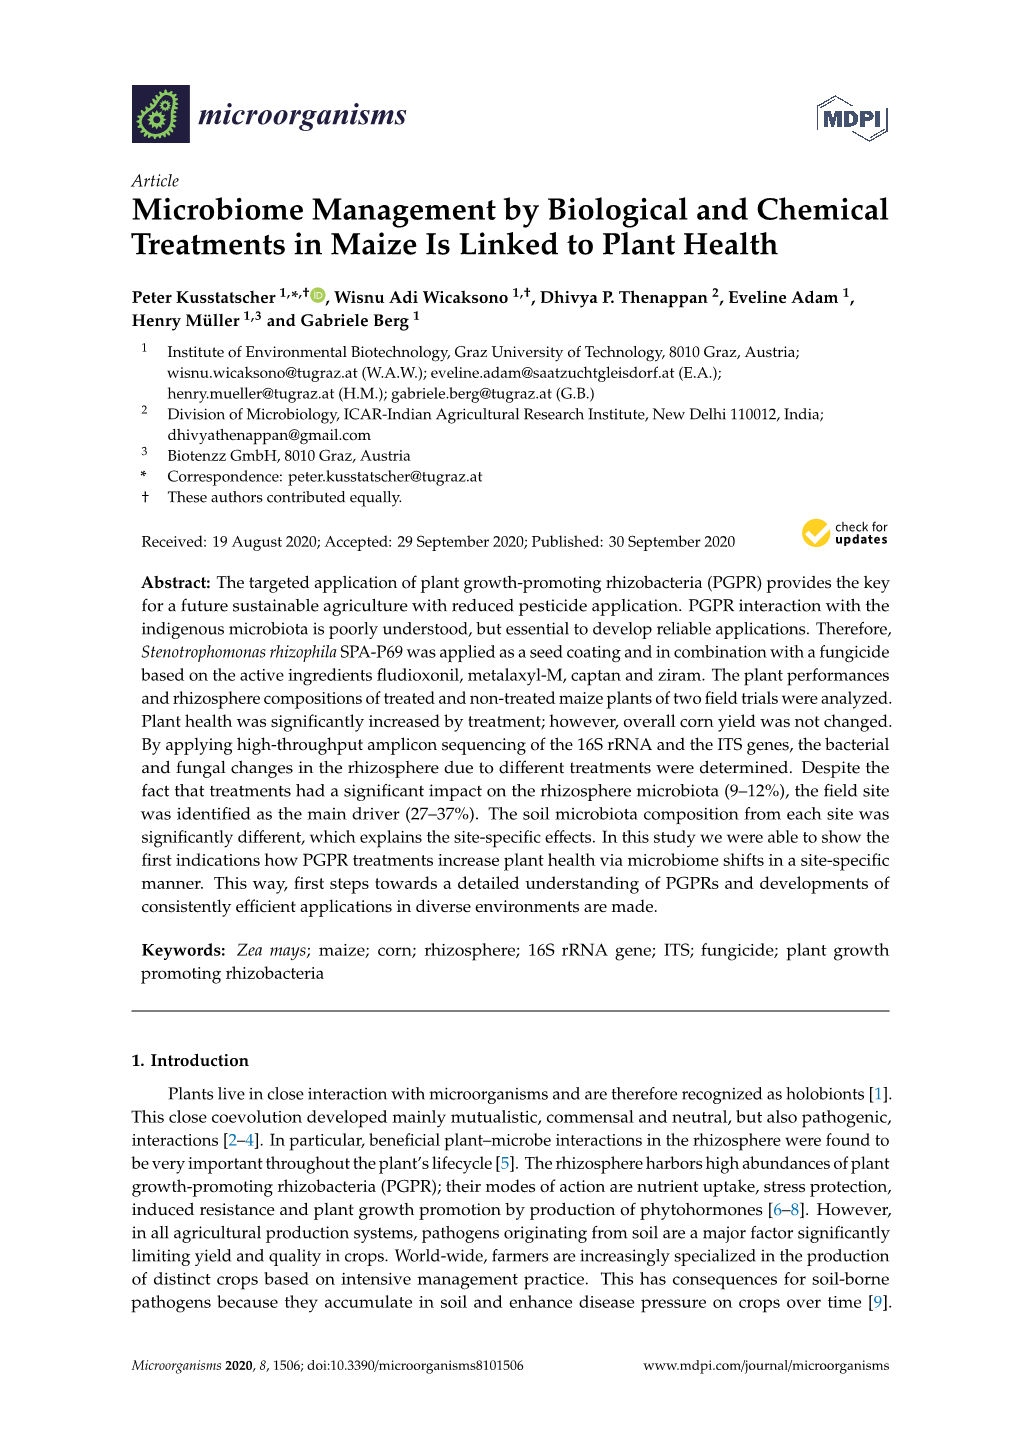 Microbiome Management by Biological and Chemical Treatments in Maize Is Linked to Plant Health